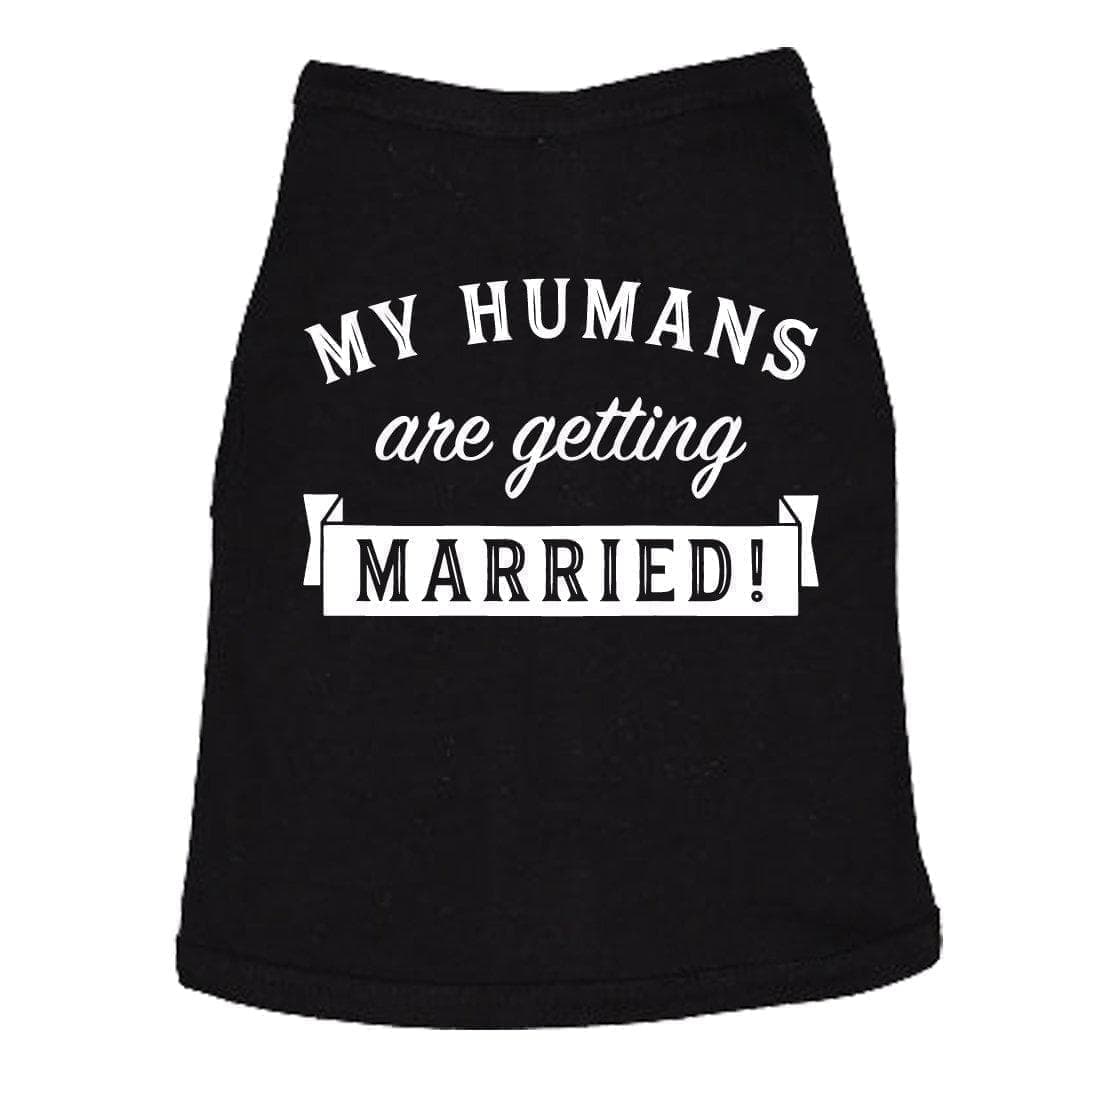 My Humans Are Getting Married Dog Shirt - Crazy Dog T-Shirts